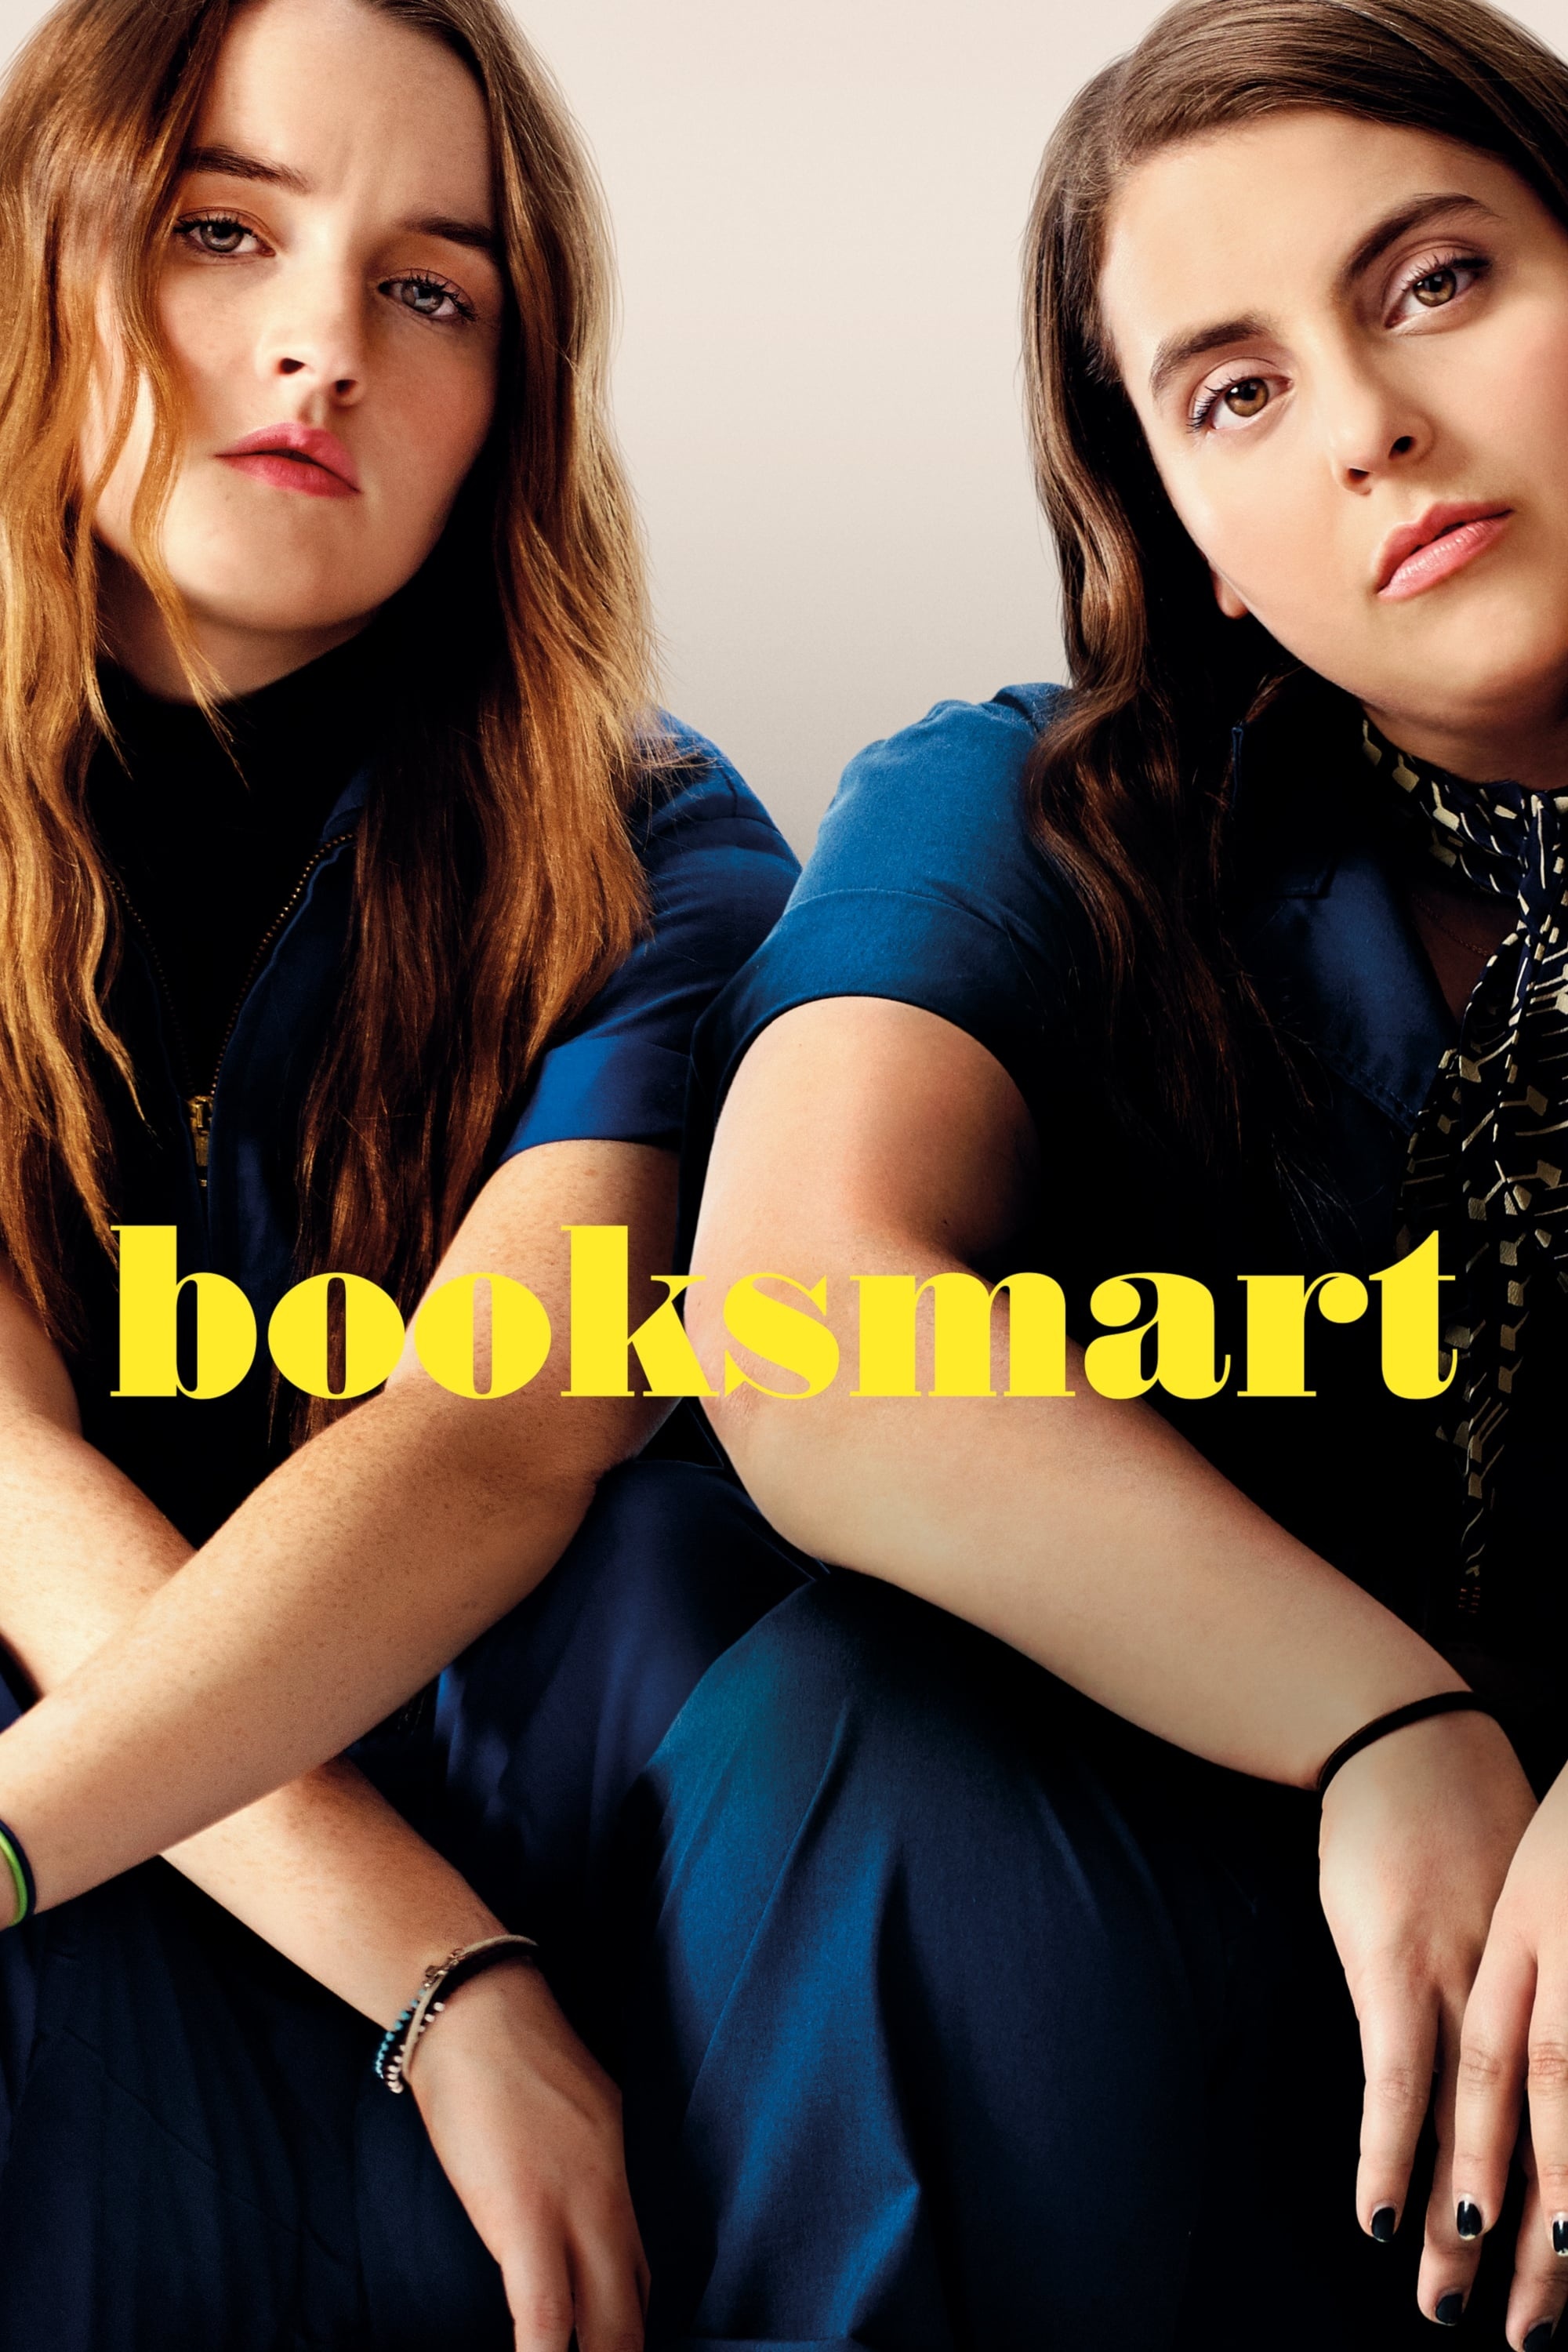 Booksmart film, Playful poster design, Youthful energy, Unforgettable night, 2000x3000 HD Phone